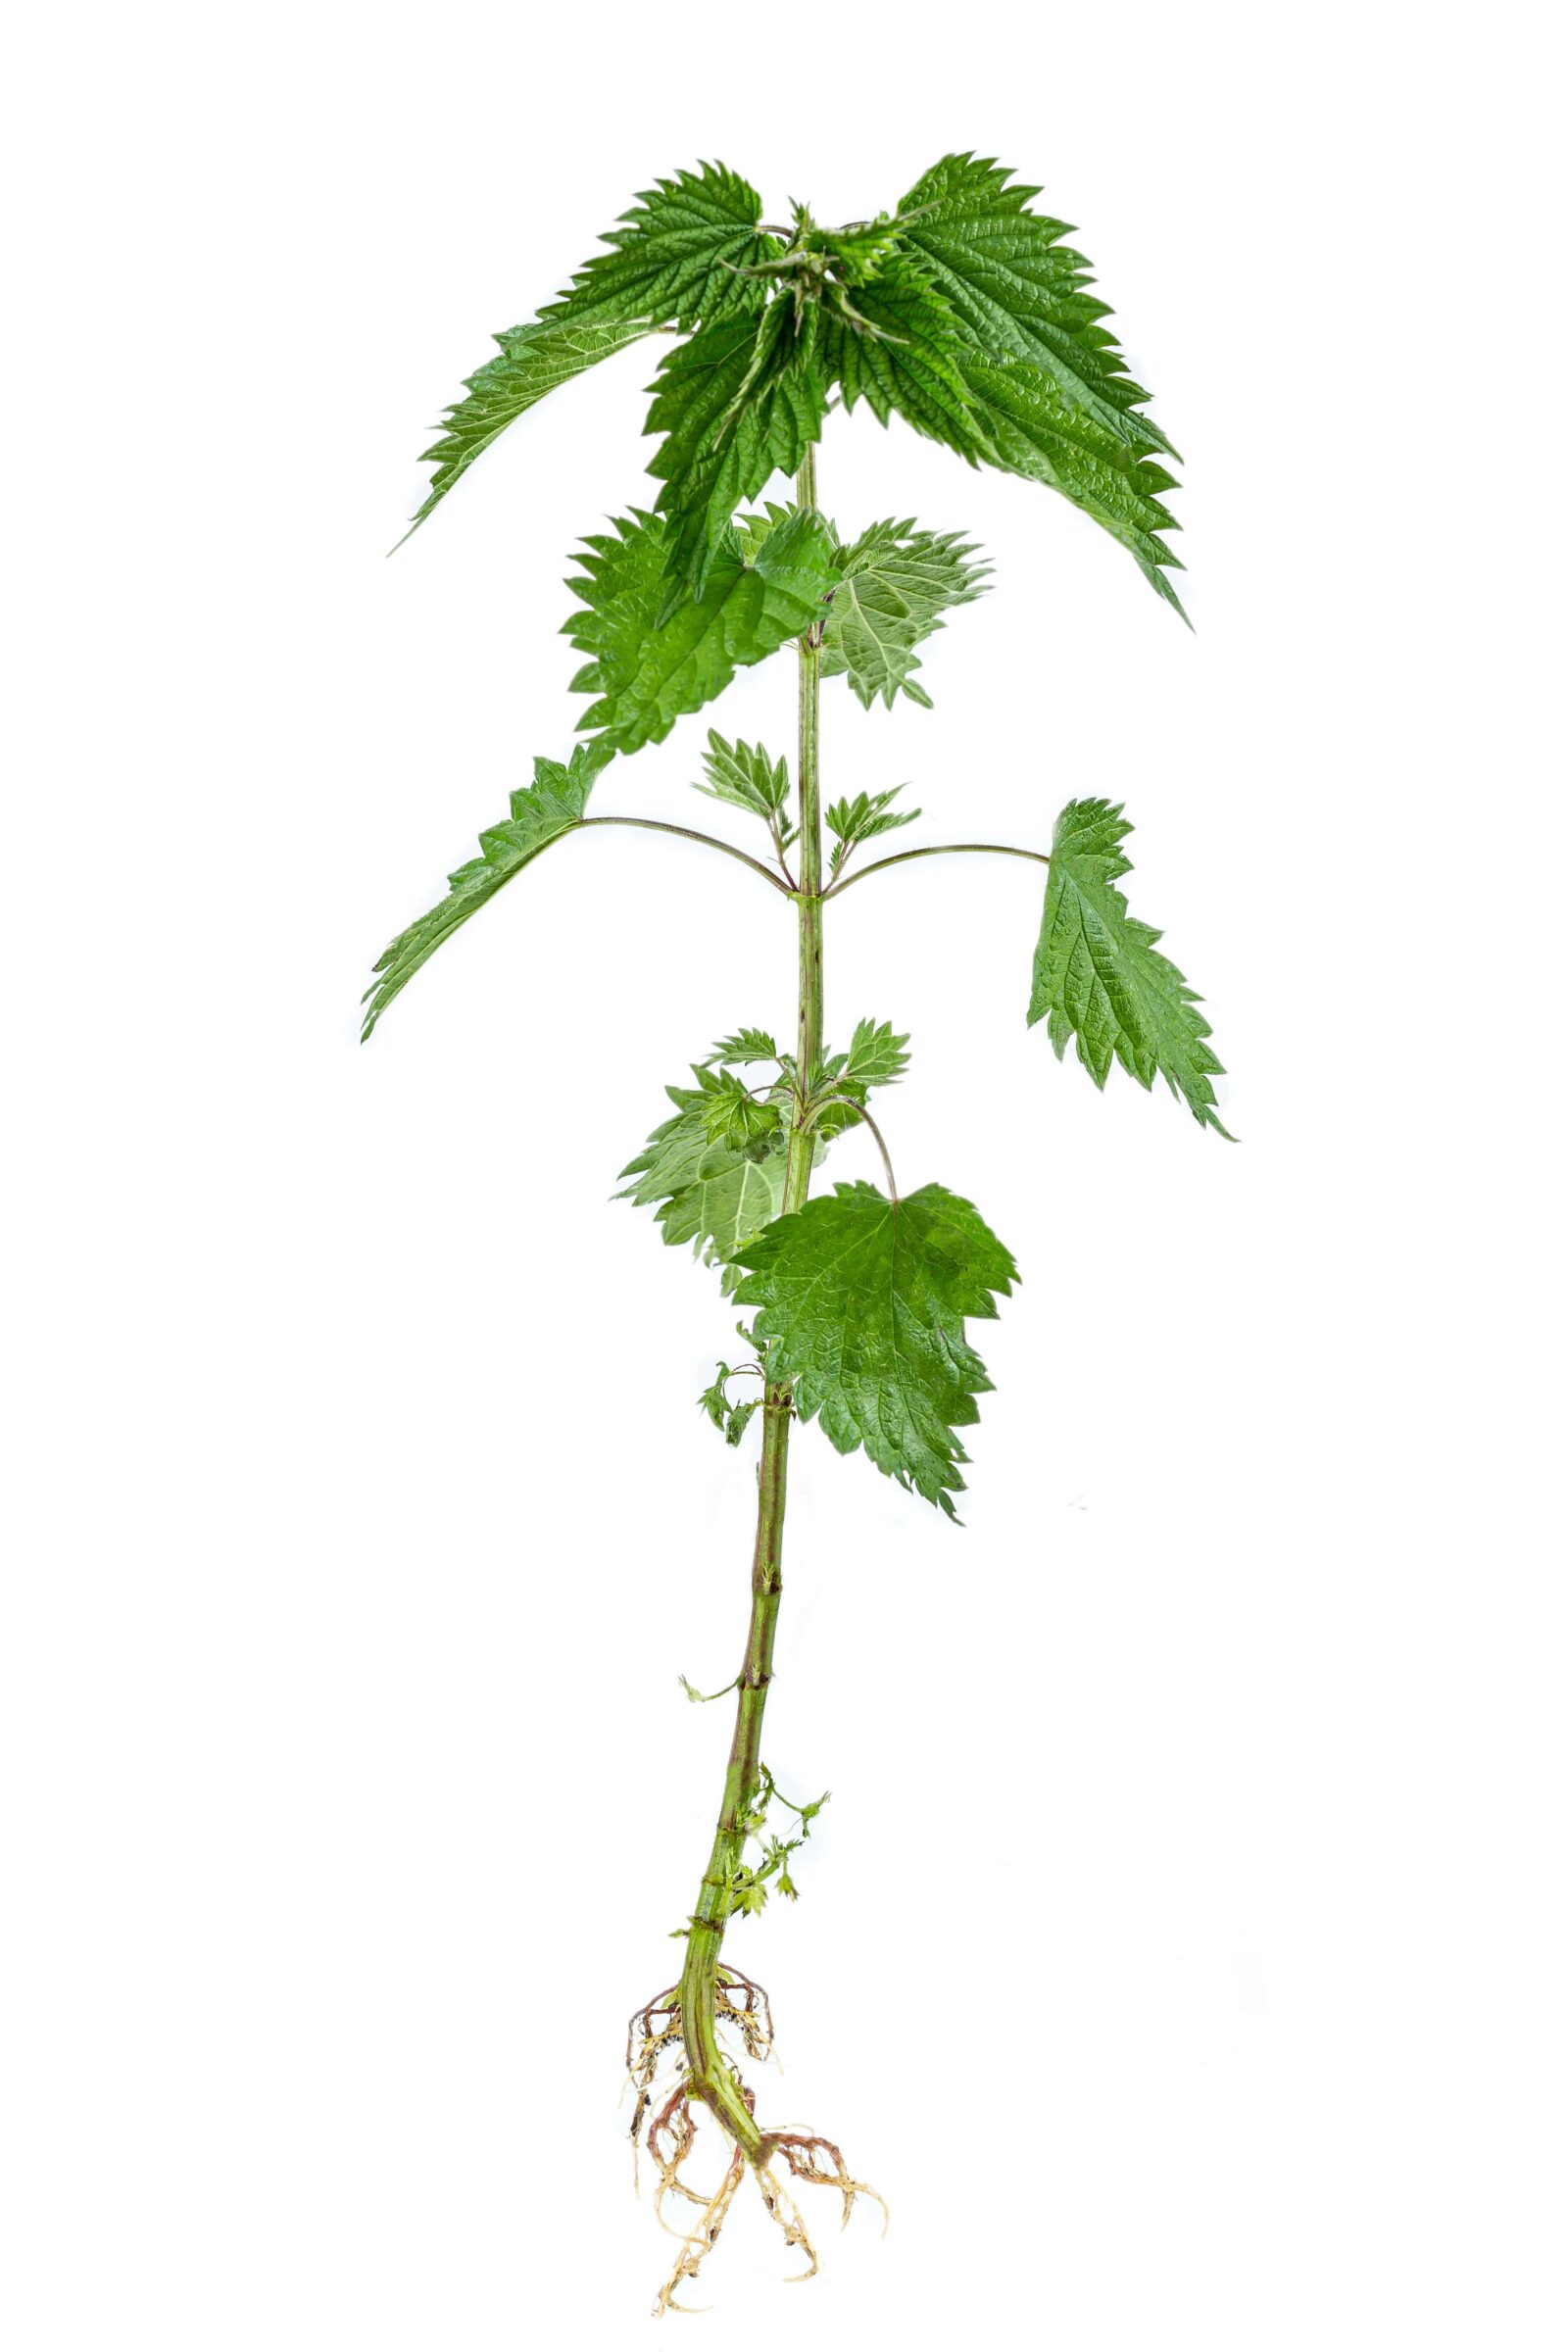 Stinking nettle (Urtica dioica) all plant and with root, on a white background.
